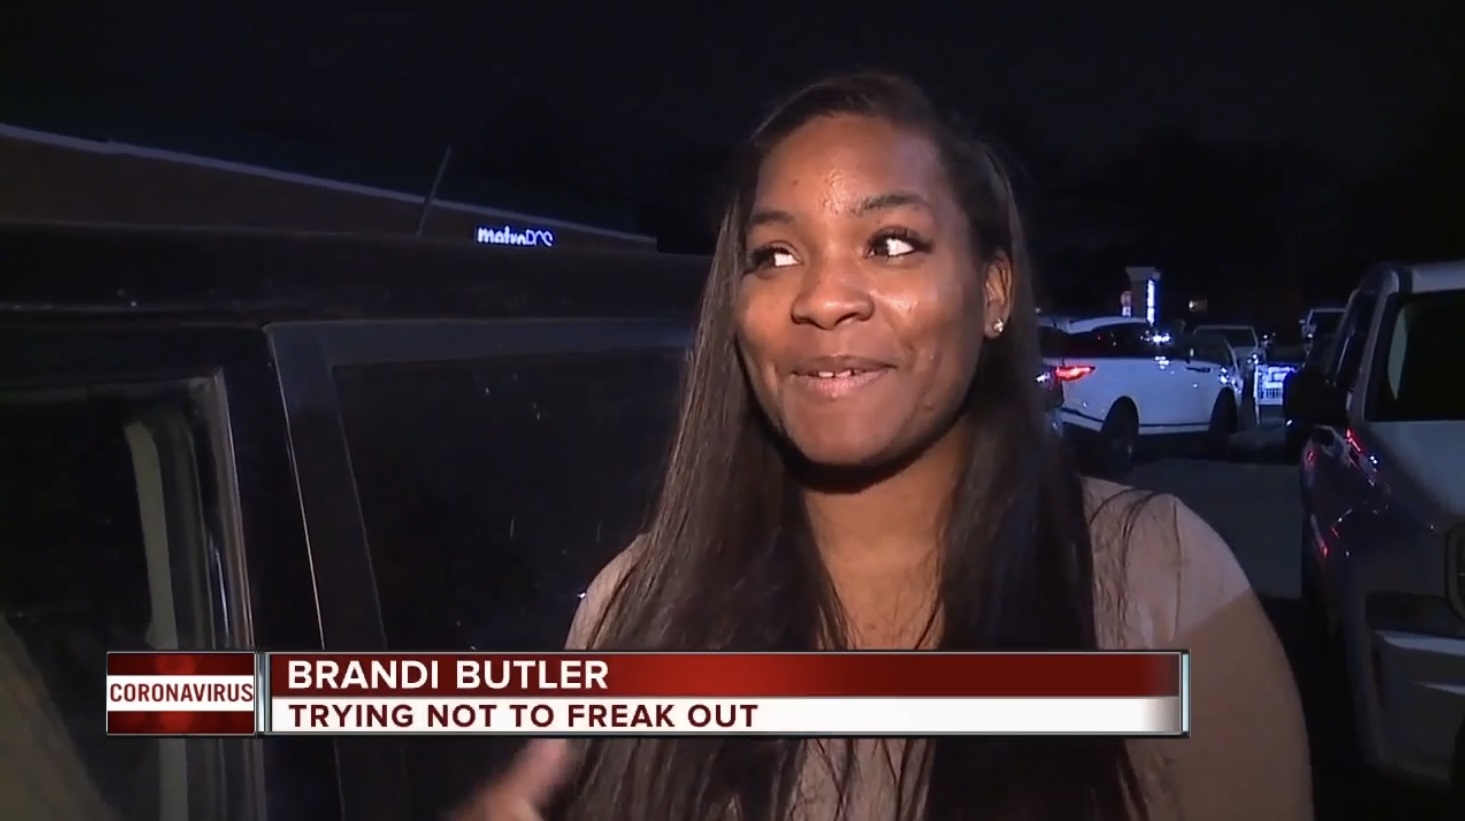 Brandi Butler: Trying Not To Freak Out